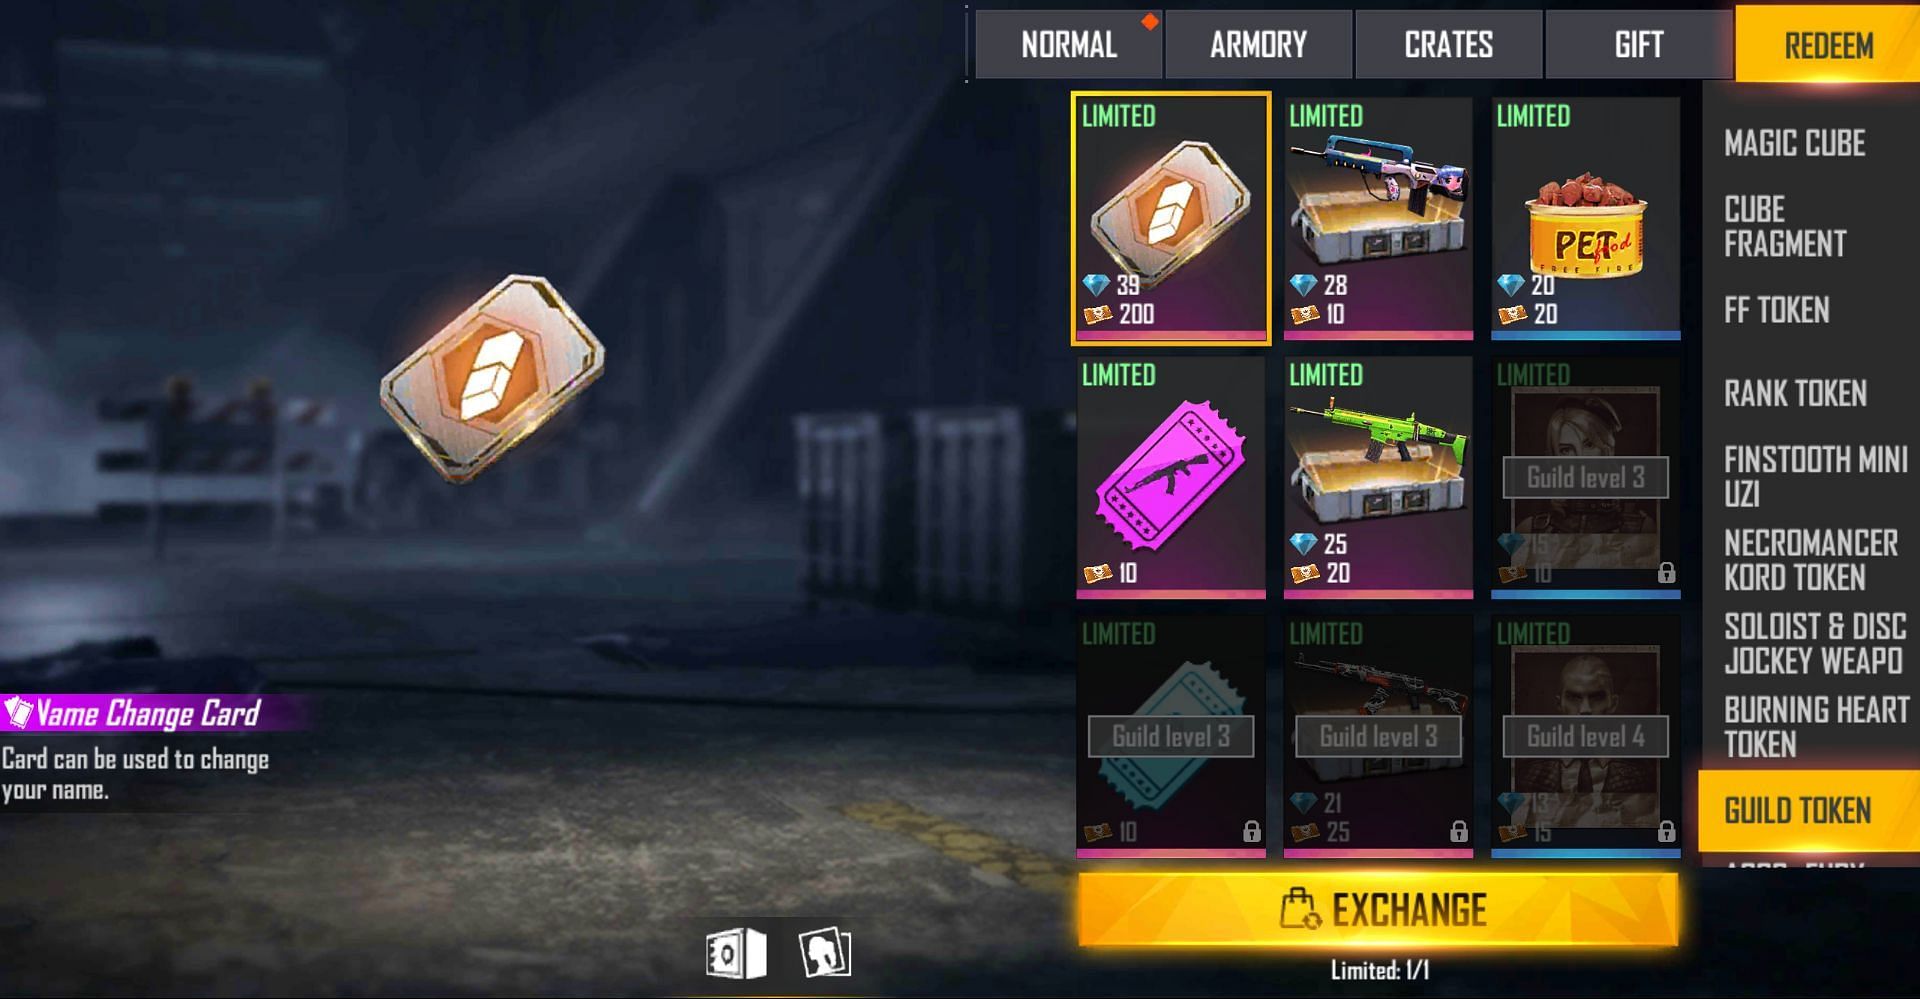 The name change card can be exchanged for guild tokens and diamonds (Image via Free Fire)